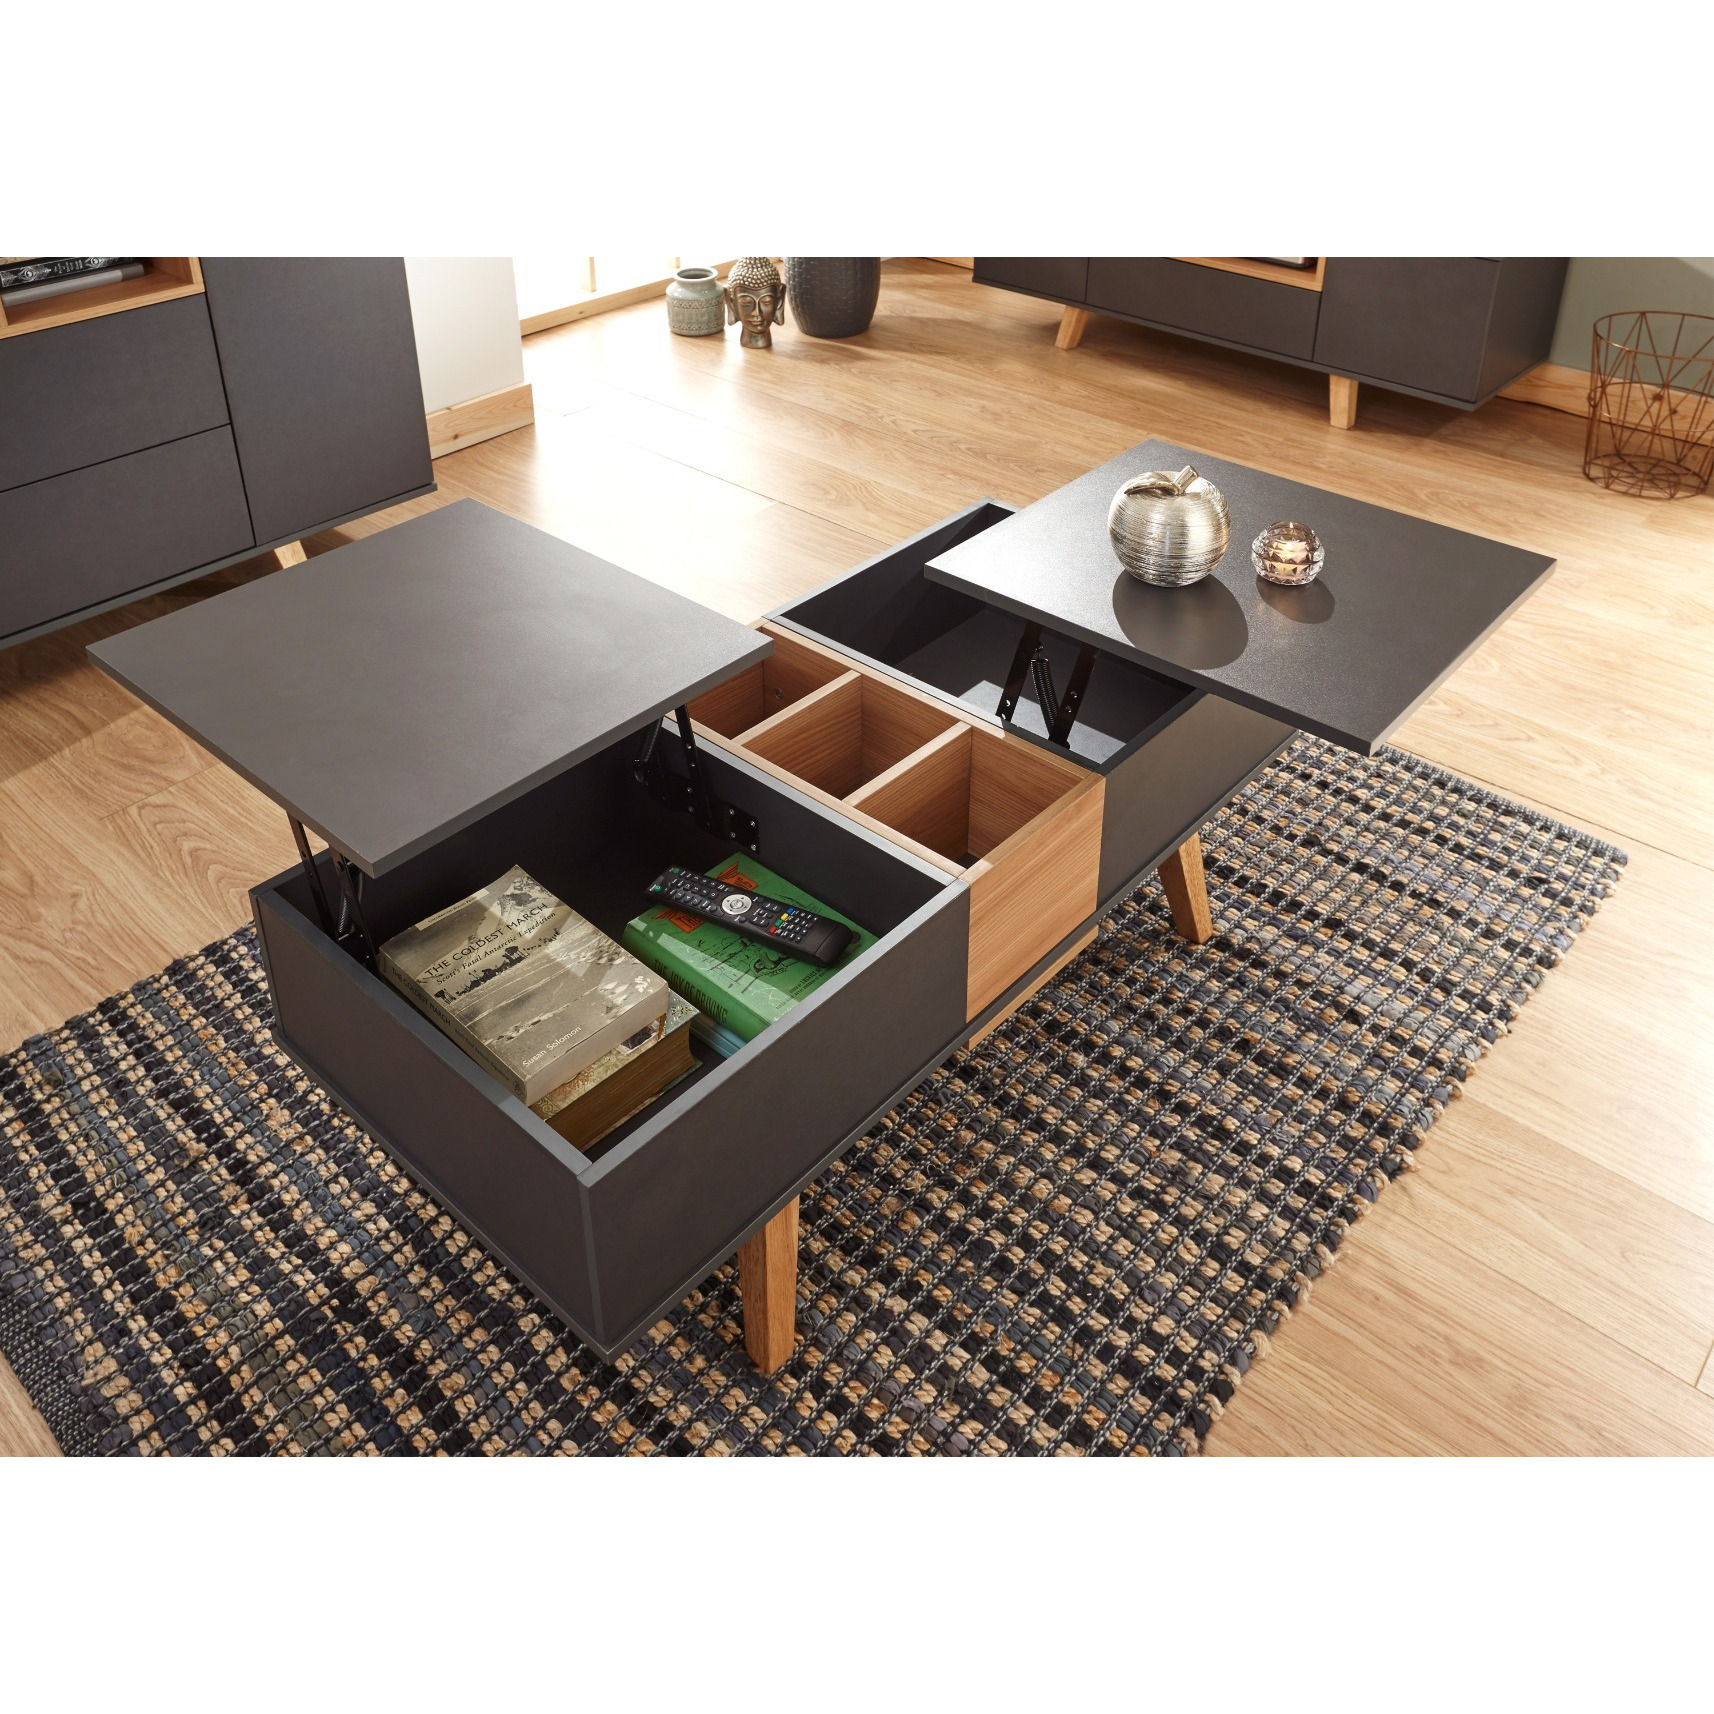 GFW Modena Double Lifting Coffee Table - image 1